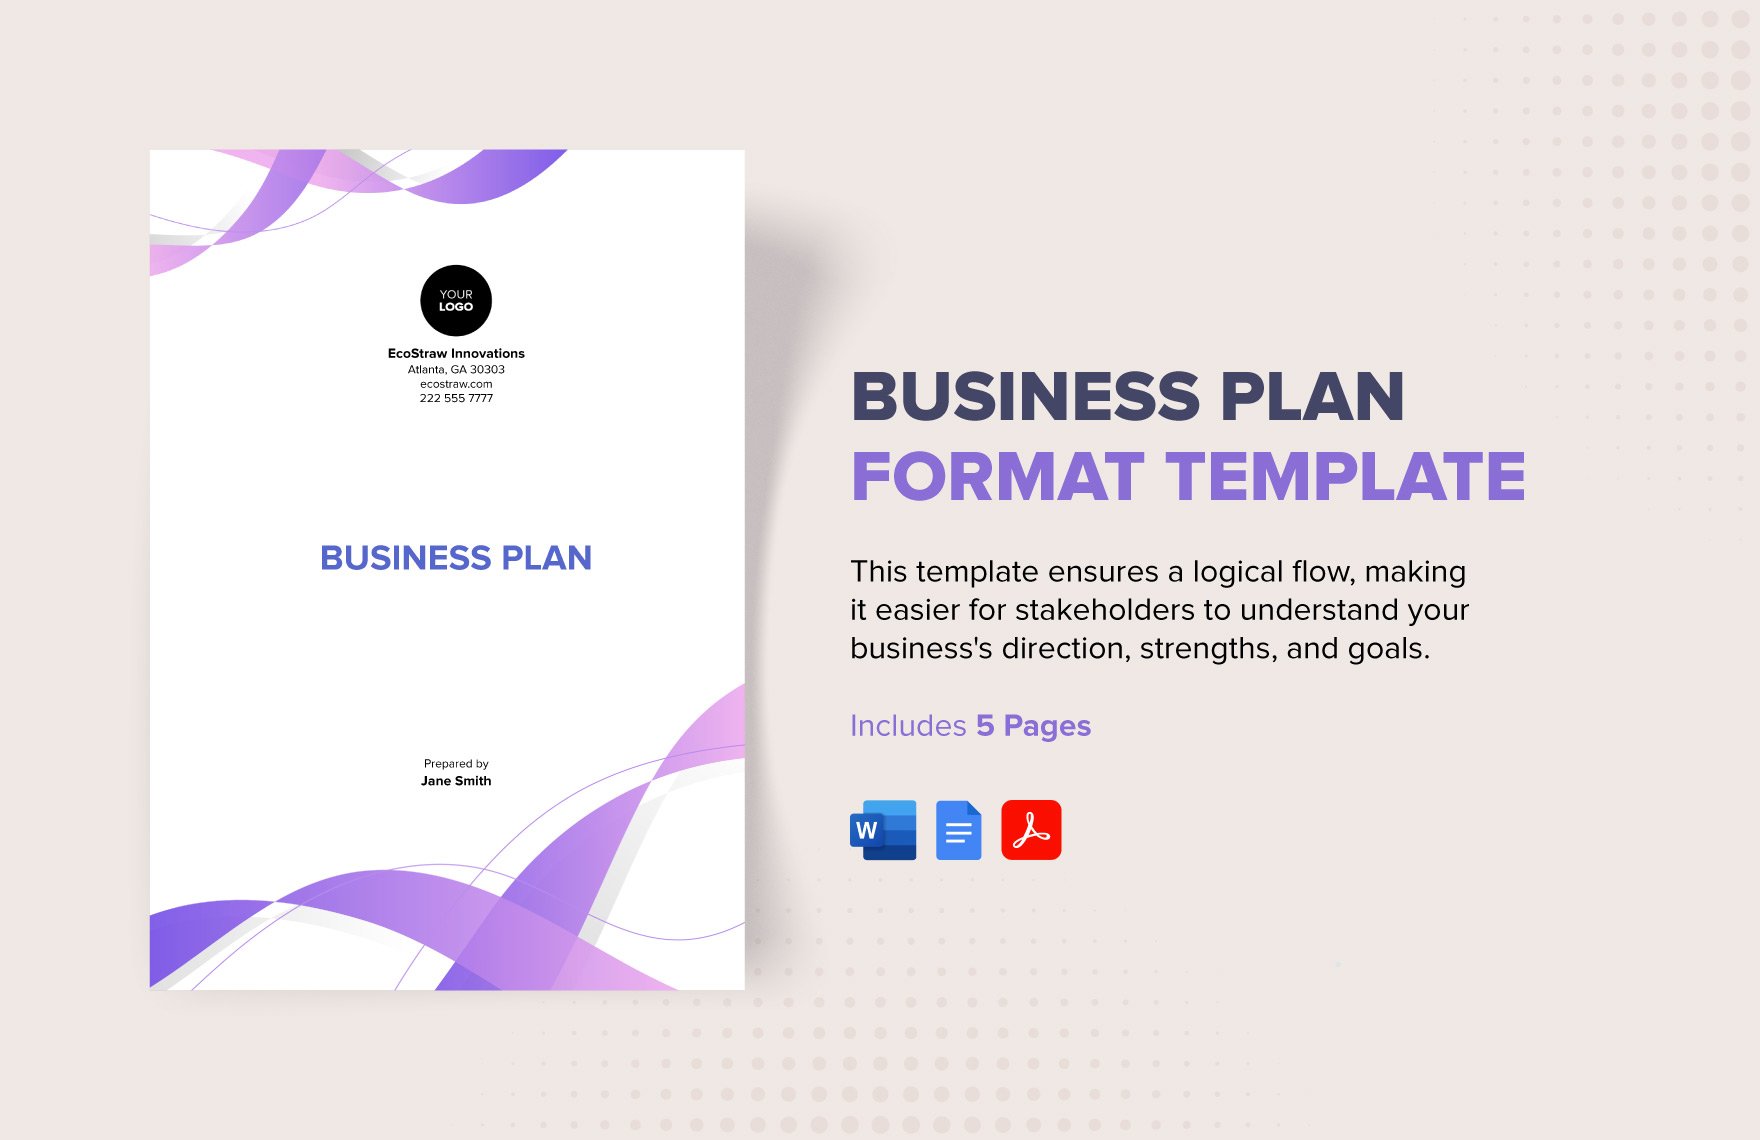 Business Plan Format Template in Word, Google Docs, PDF